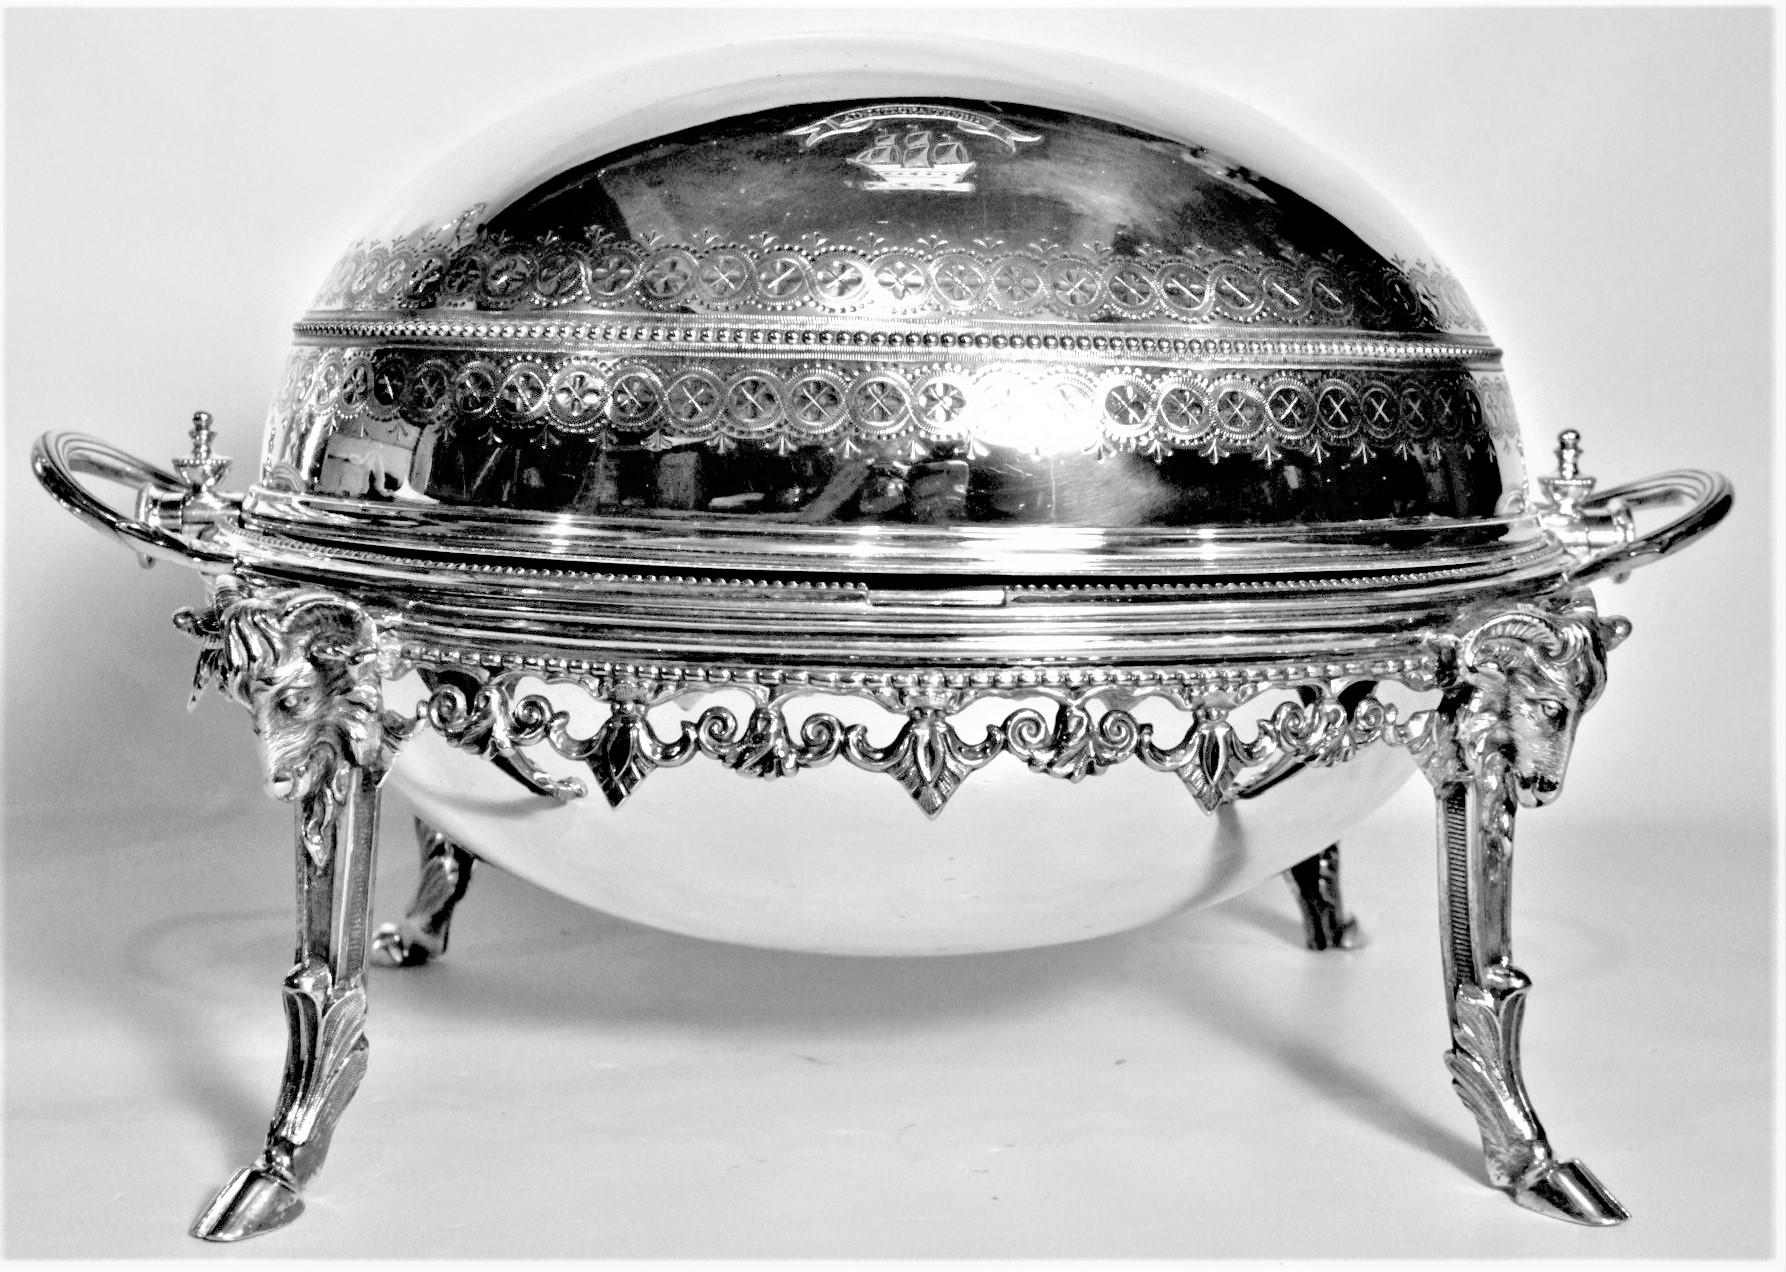 Antique English Silver Plated Revolving Breakfast Dome with Figural Ram Accents In Good Condition For Sale In Hamilton, Ontario